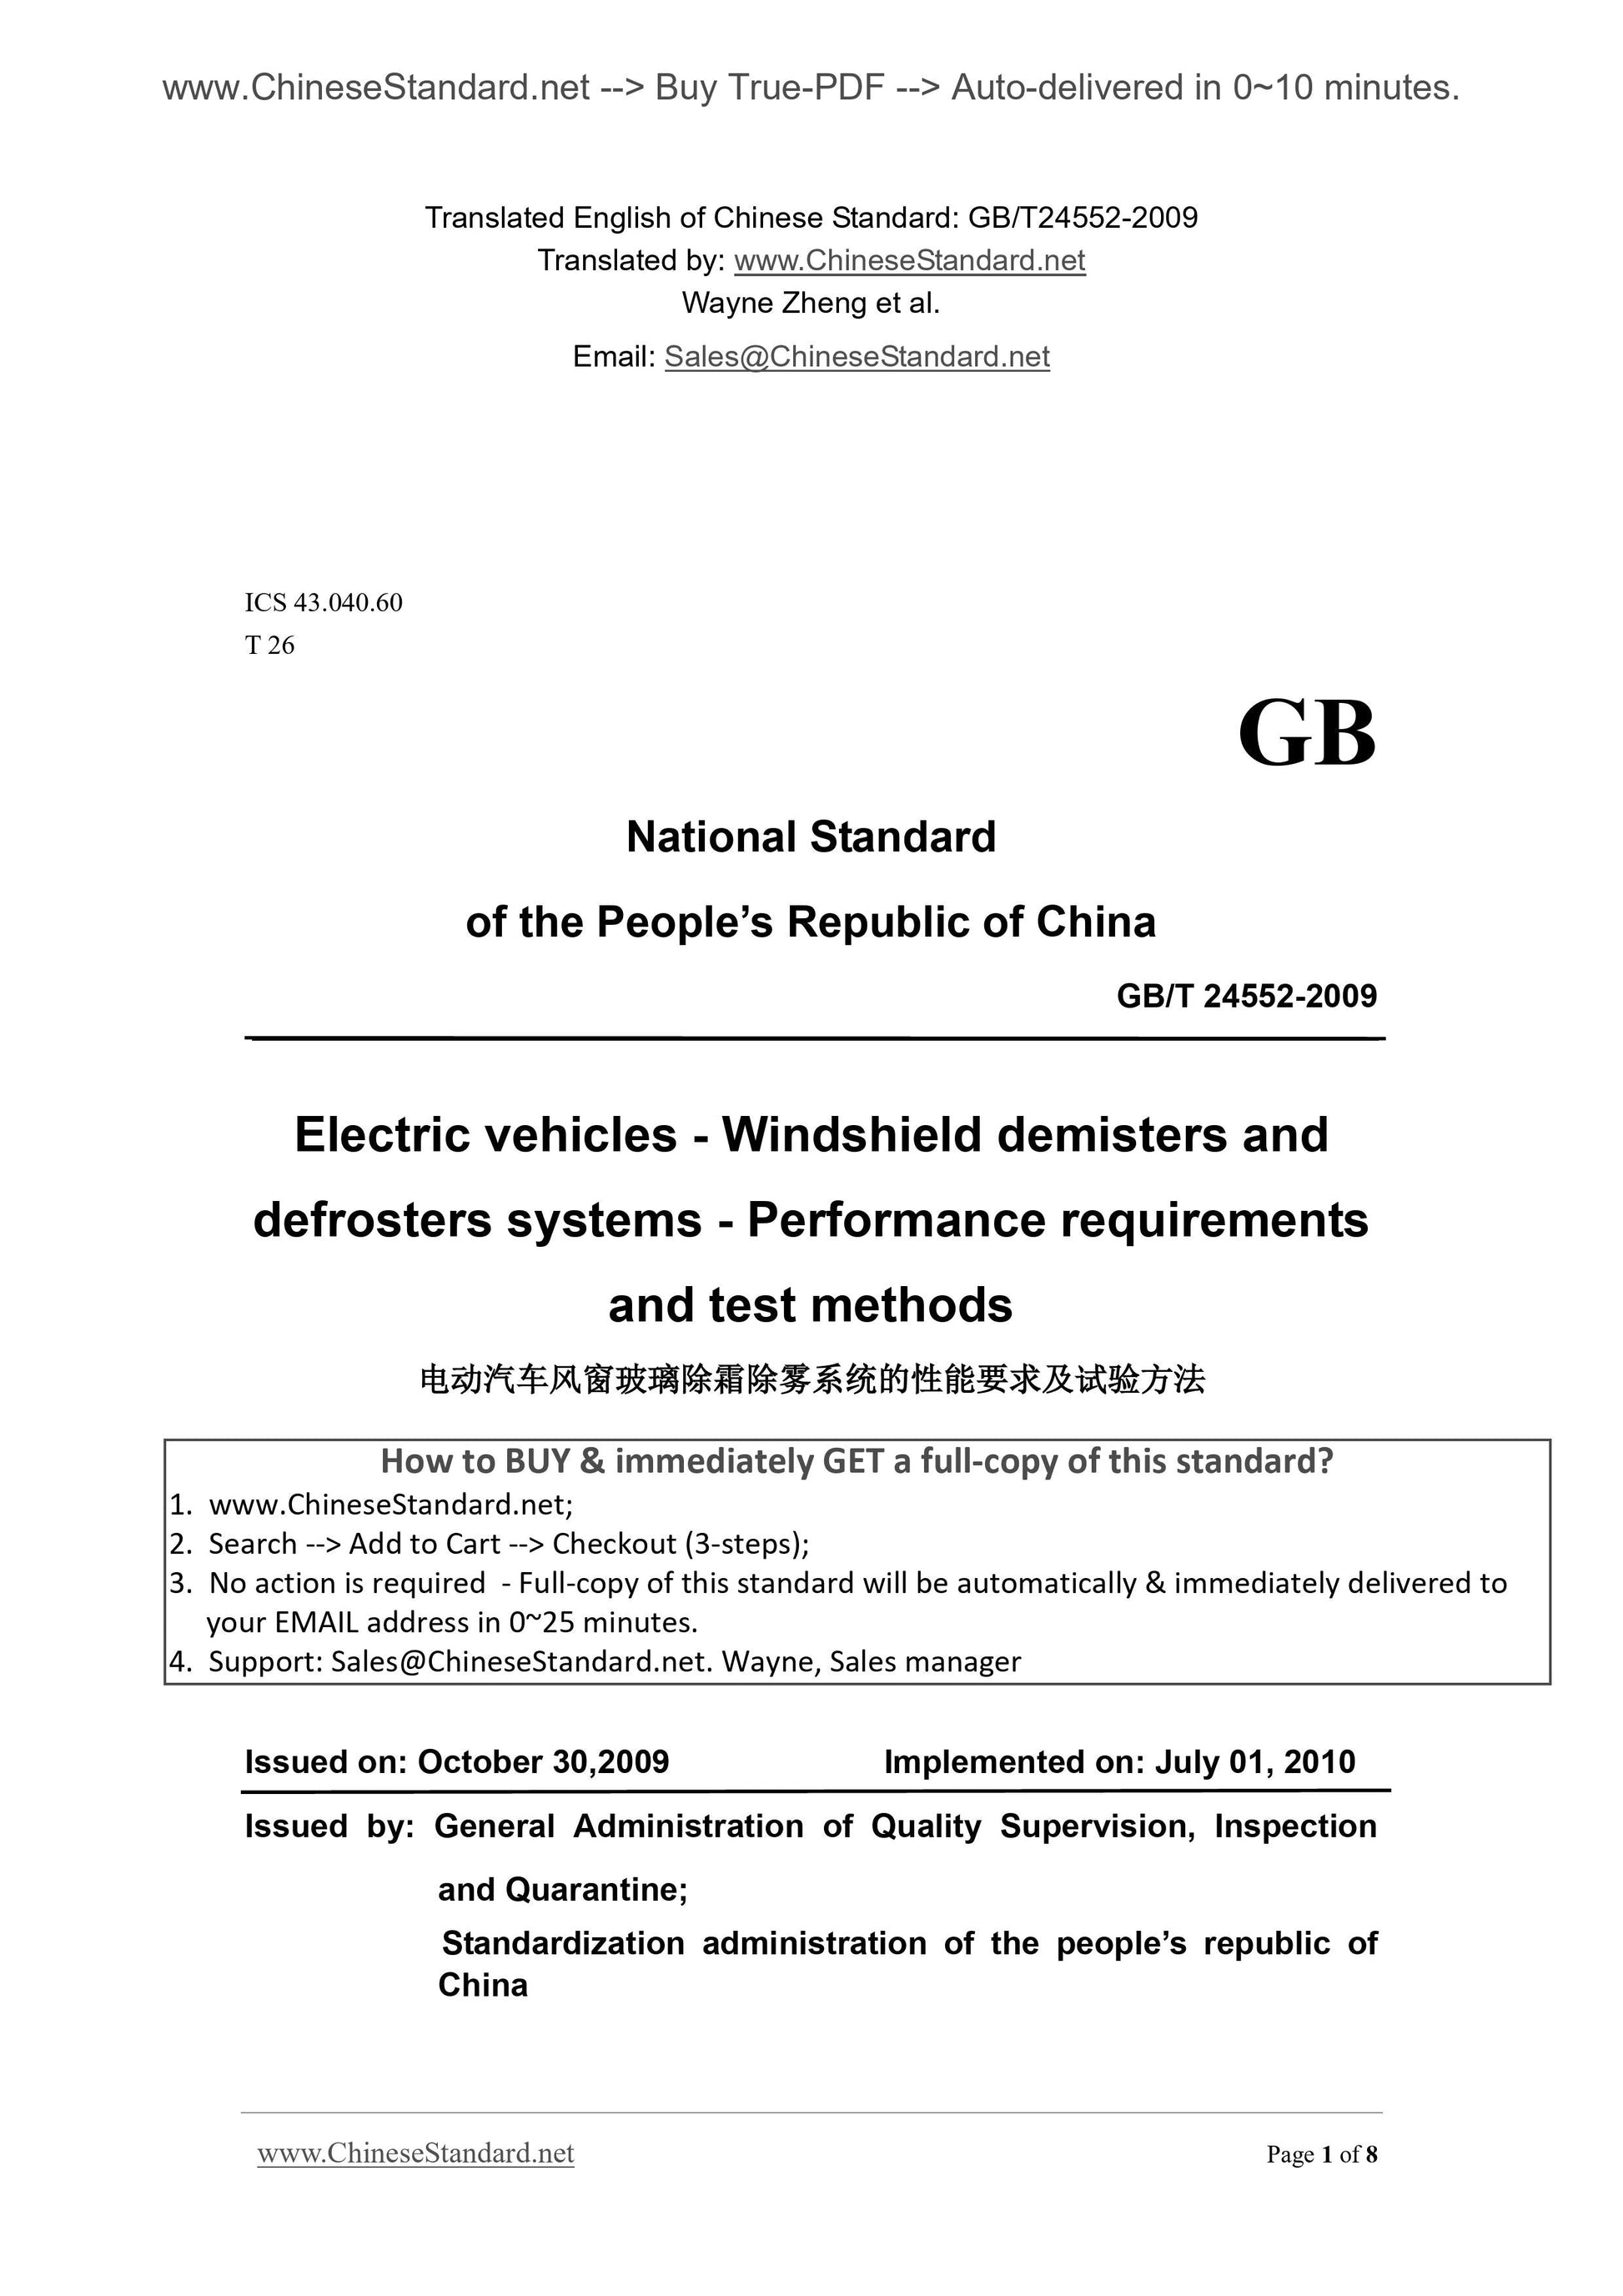 GB/T 24552-2009 Page 1